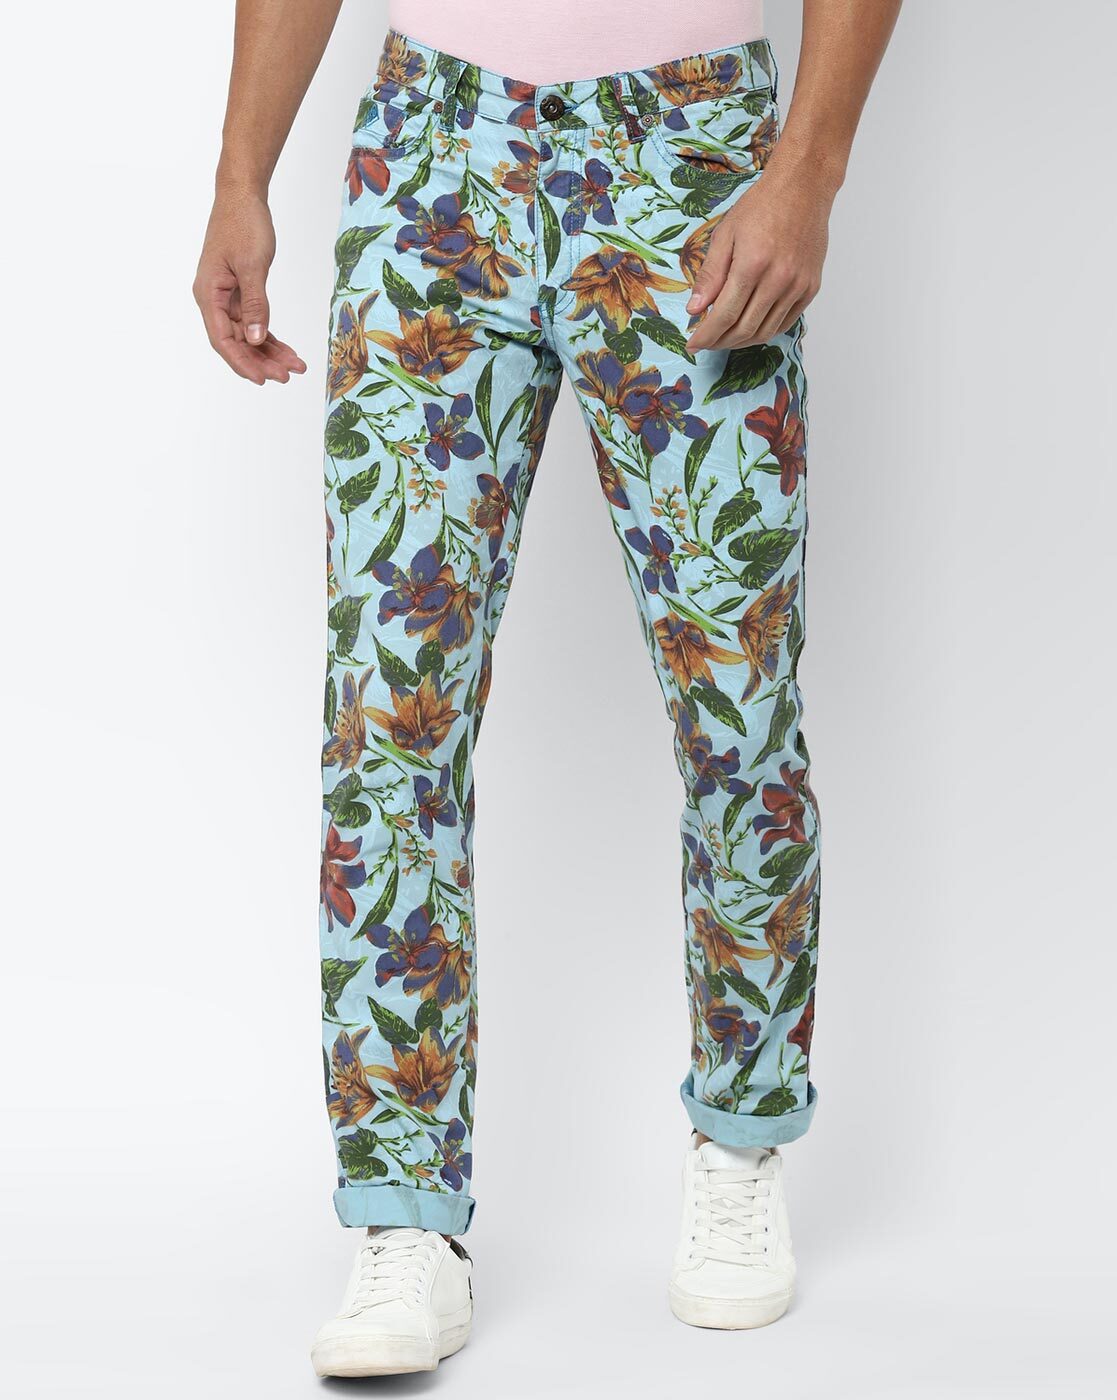 Buy Womens Floral Printed Trousers